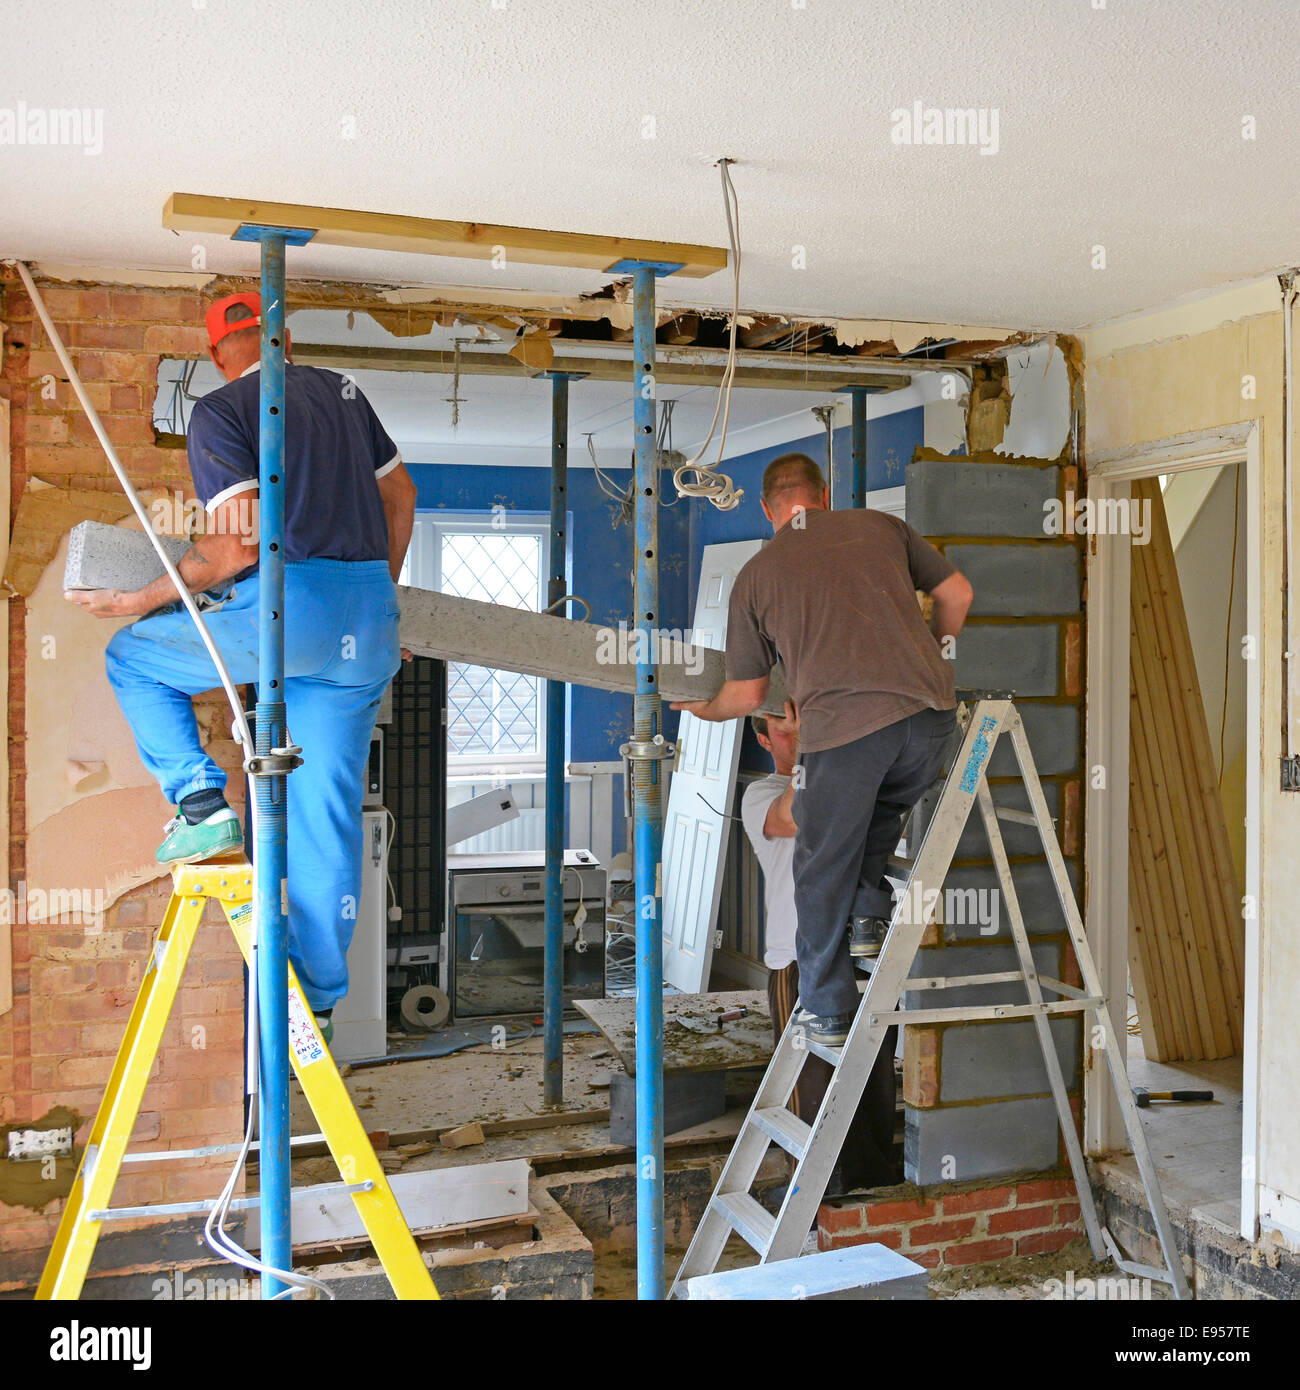 Builders at work install new lintel beam during major extension & alterations to detached house Brentwood Essex England UK see 'More Info' note below Stock Photo